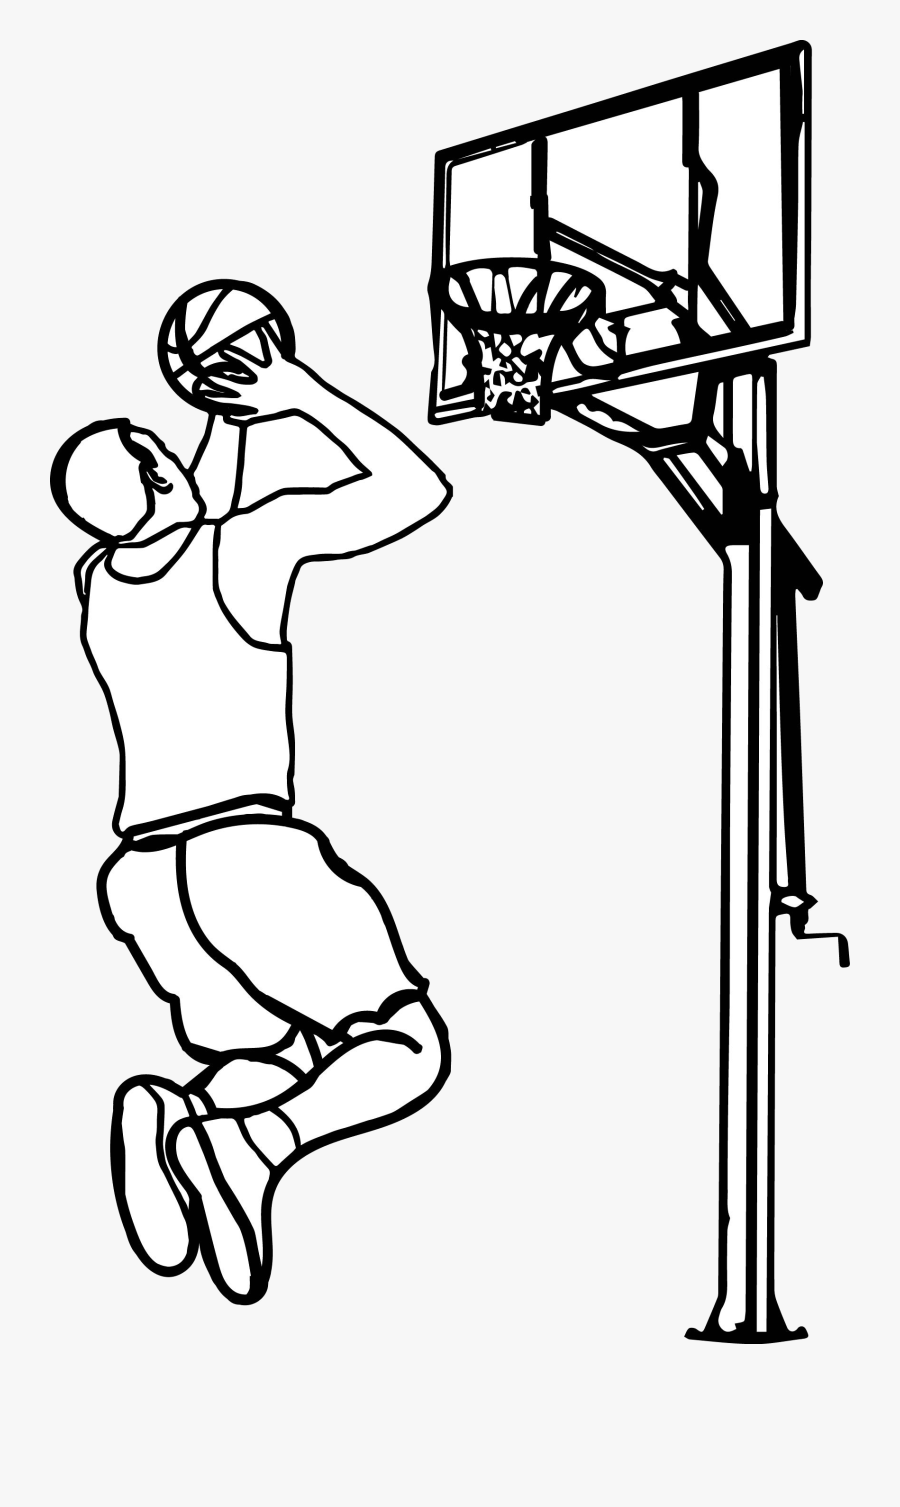 Basketball Outline Playing Clipart The Cliparts Play - Playing Basketball Clipart Black And White, Transparent Clipart